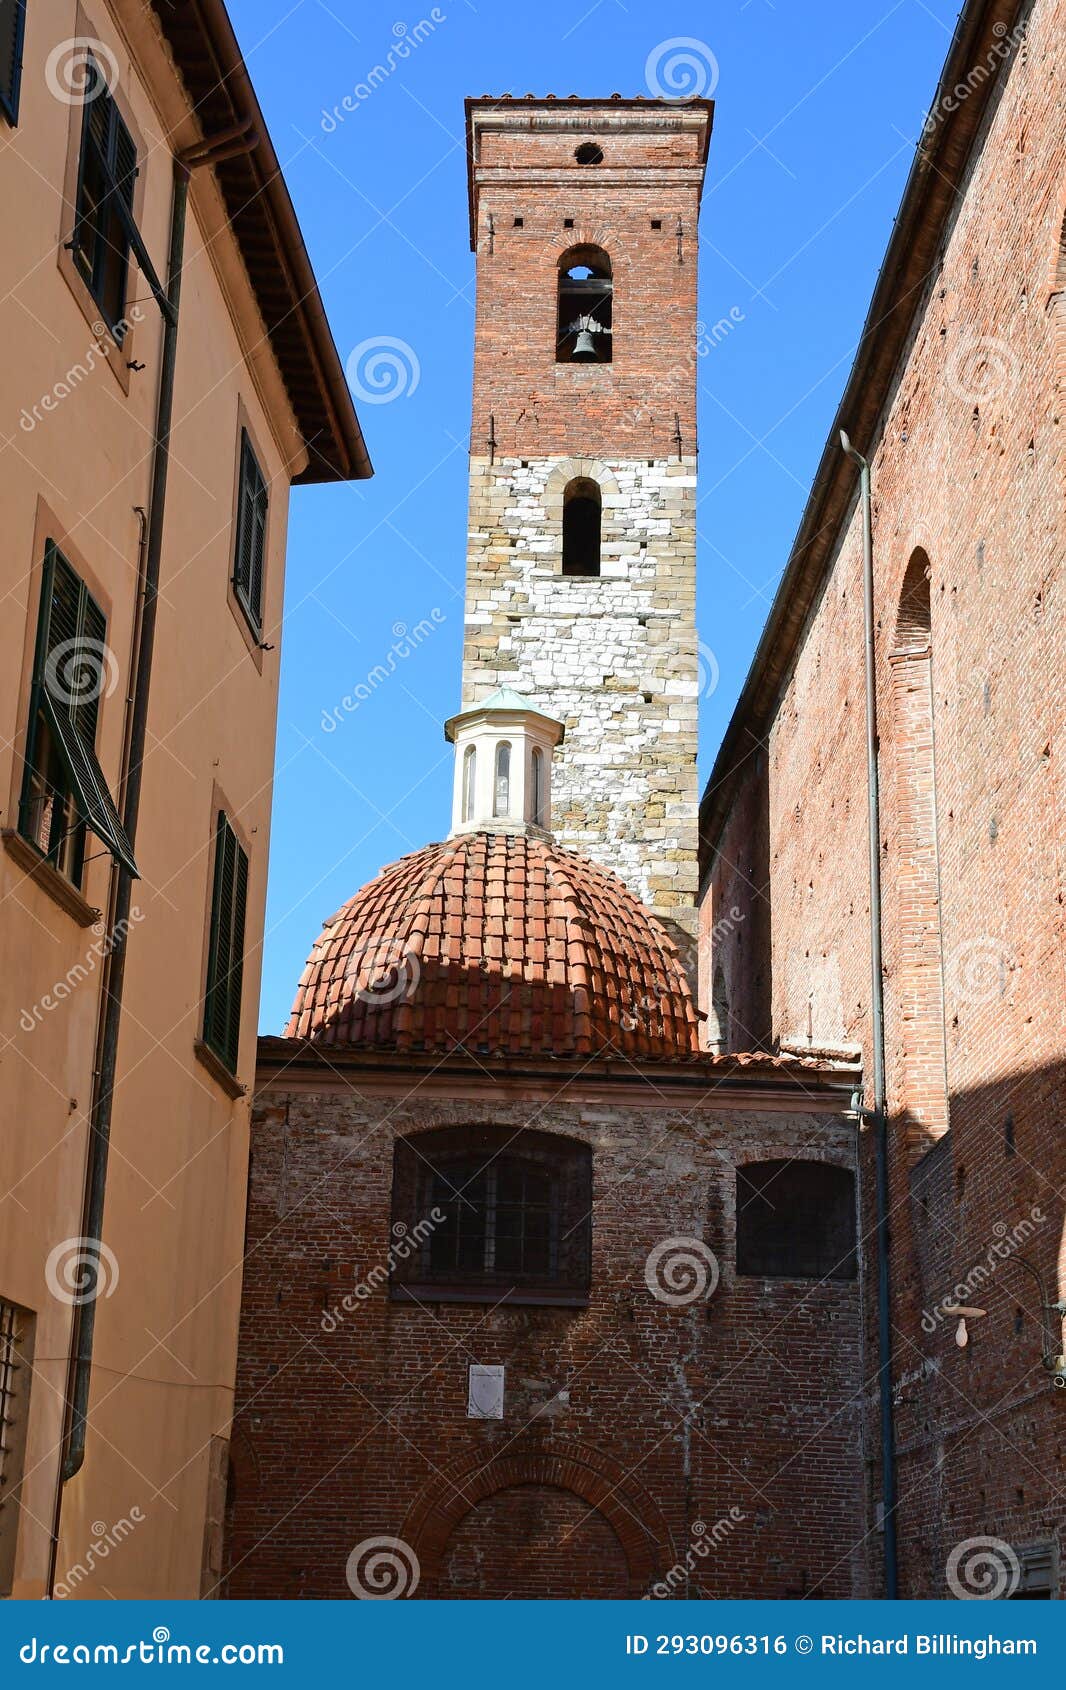 tower and chiesa di sant'agostino, piazza sant'agostino, lucca, tuscany, italy